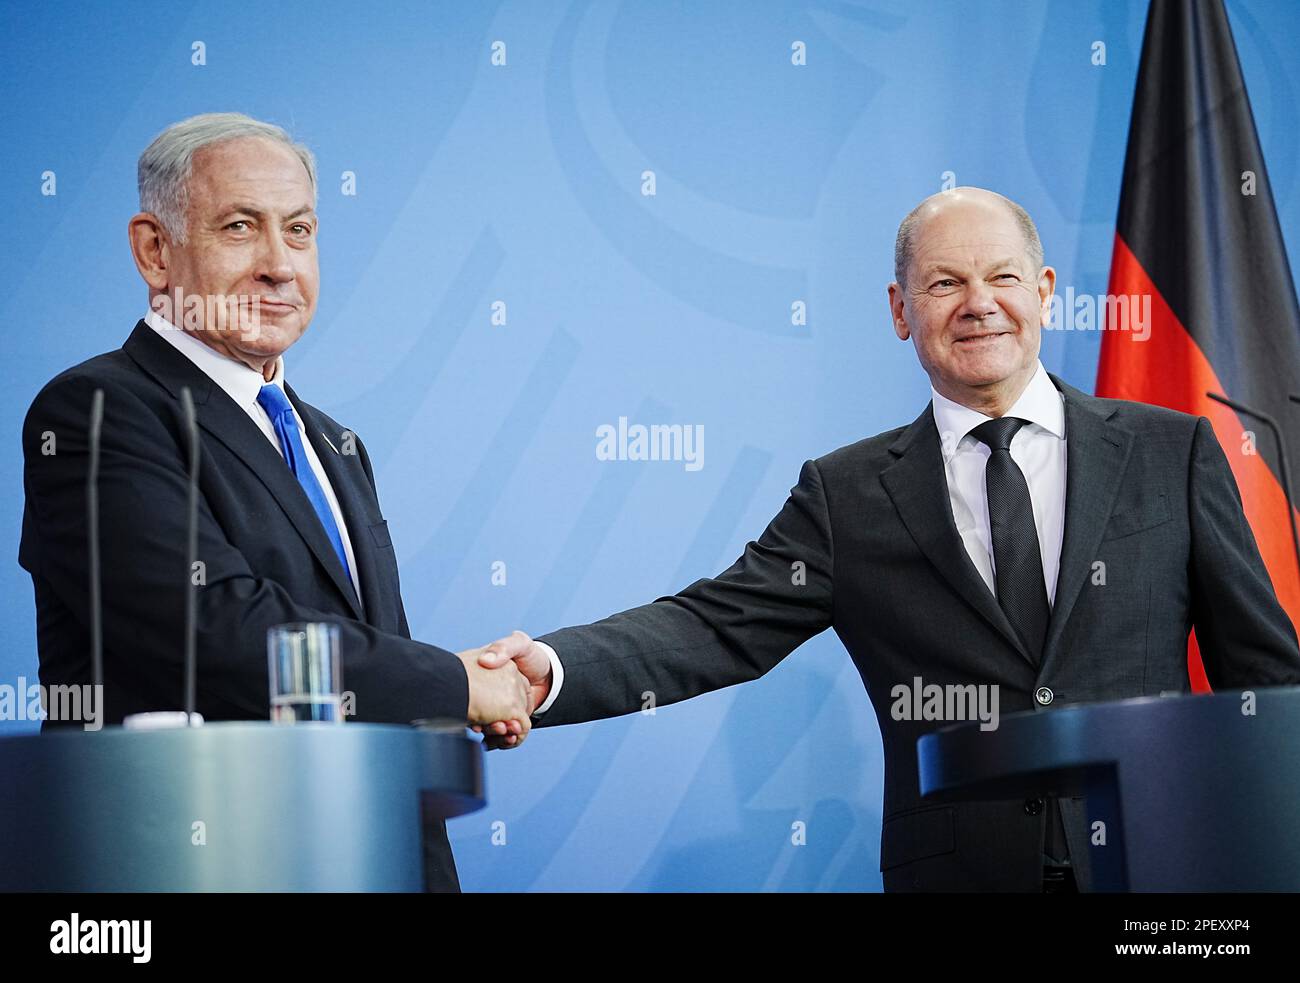 Berlin, Germany. 16th Mar, 2023. German Chancellor Olaf Scholz (SPD, r) and Benjamin Netanyahu, Prime Minister of Israel, hold a press conference at the Federal Chancellery. According to the German government, the talks focused on bilateral cooperation as well as international and regional security issues. Credit: Kay Nietfeld/dpa/Alamy Live News Stock Photo